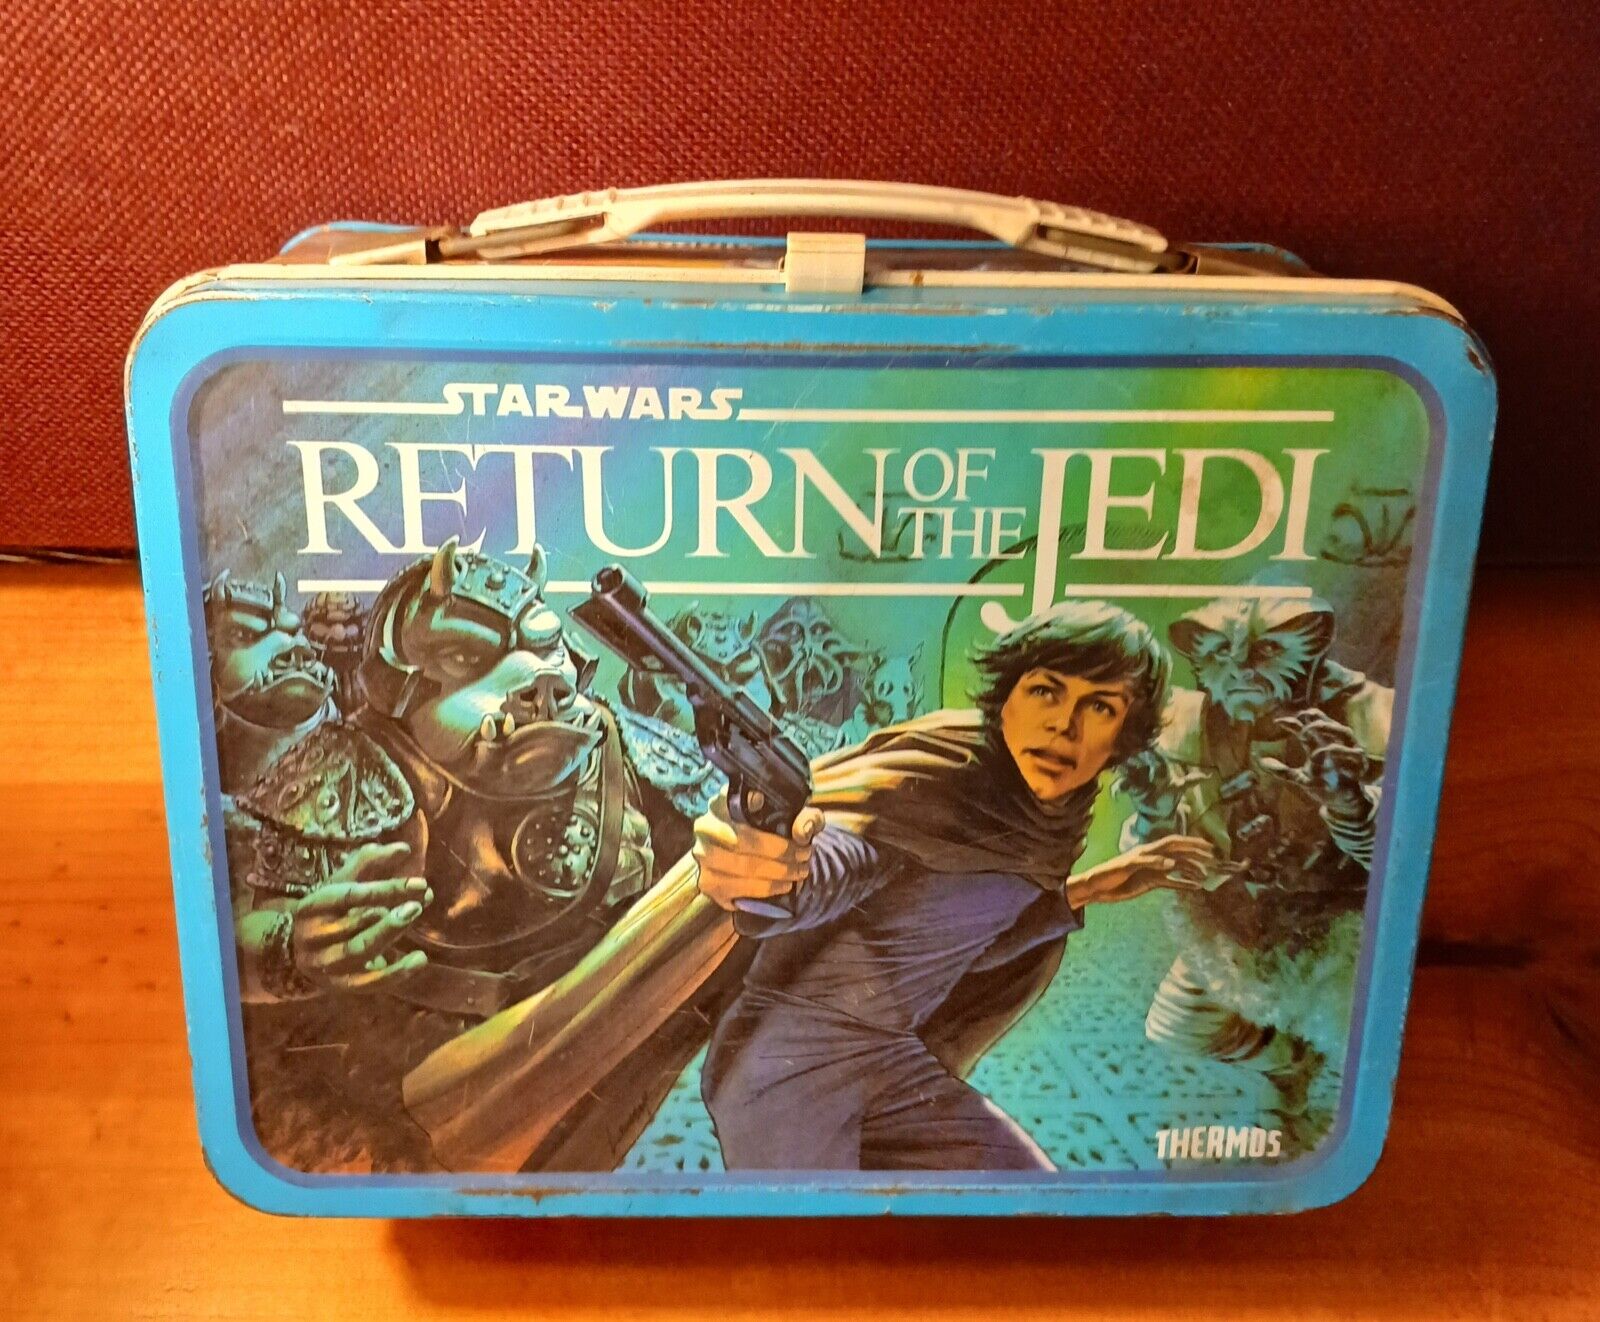 Vintage 1983 Return of the Jedi Lunch Box, Metal- Good Condition